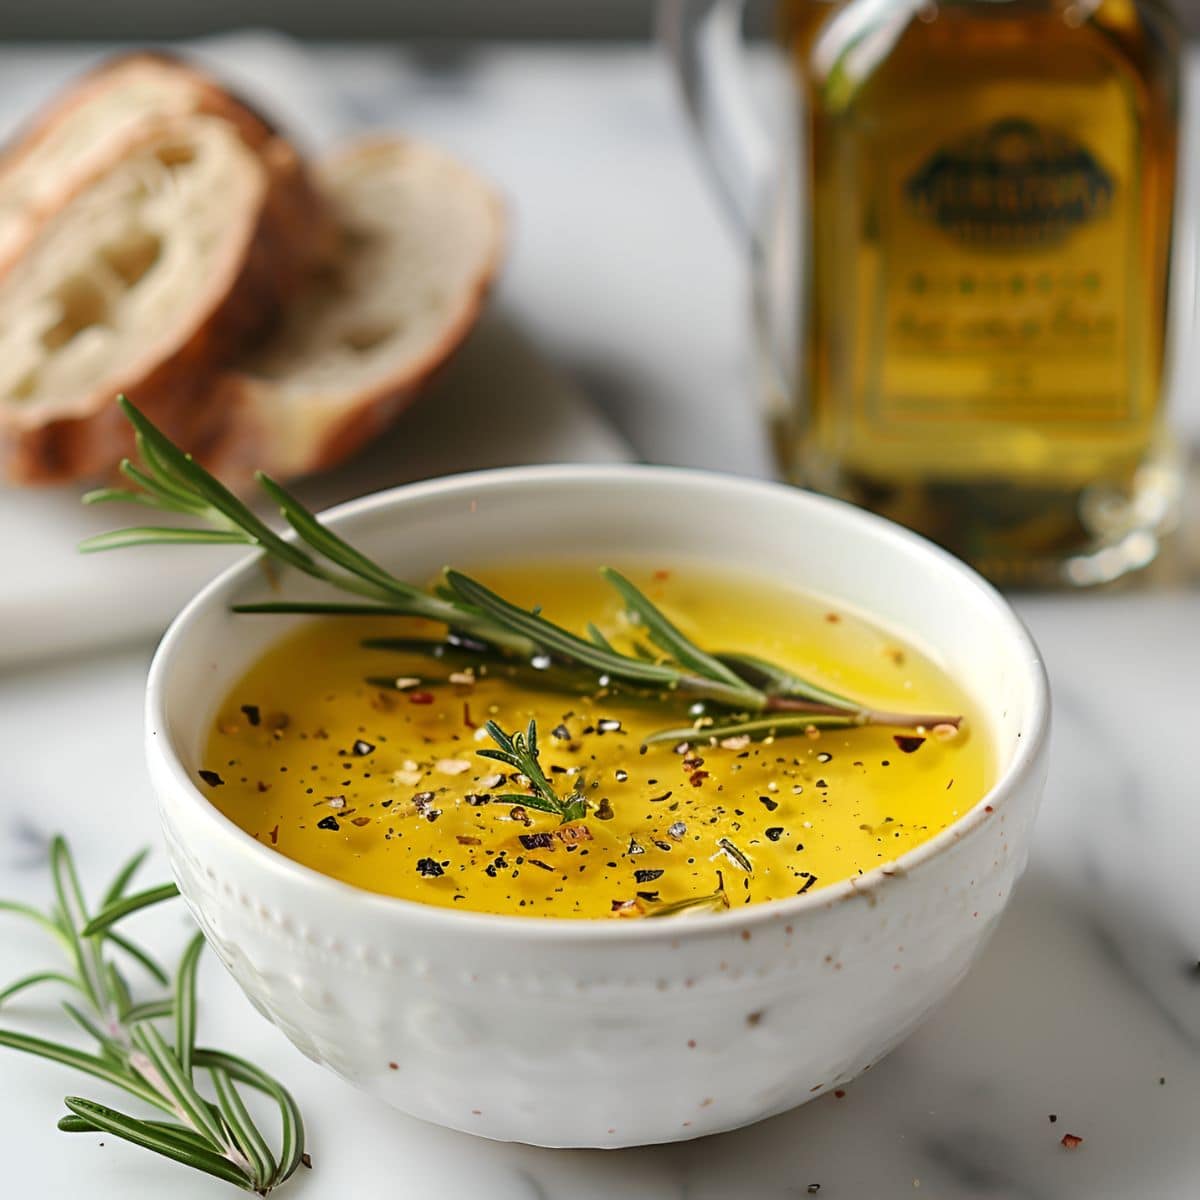 Carrabba's Bread Dip with Olive Oil, Pepper, Rosemary, and Seasonings in a White Bowl on a White Marble Table with Bread and a Bottle of Olive Oil in the Background